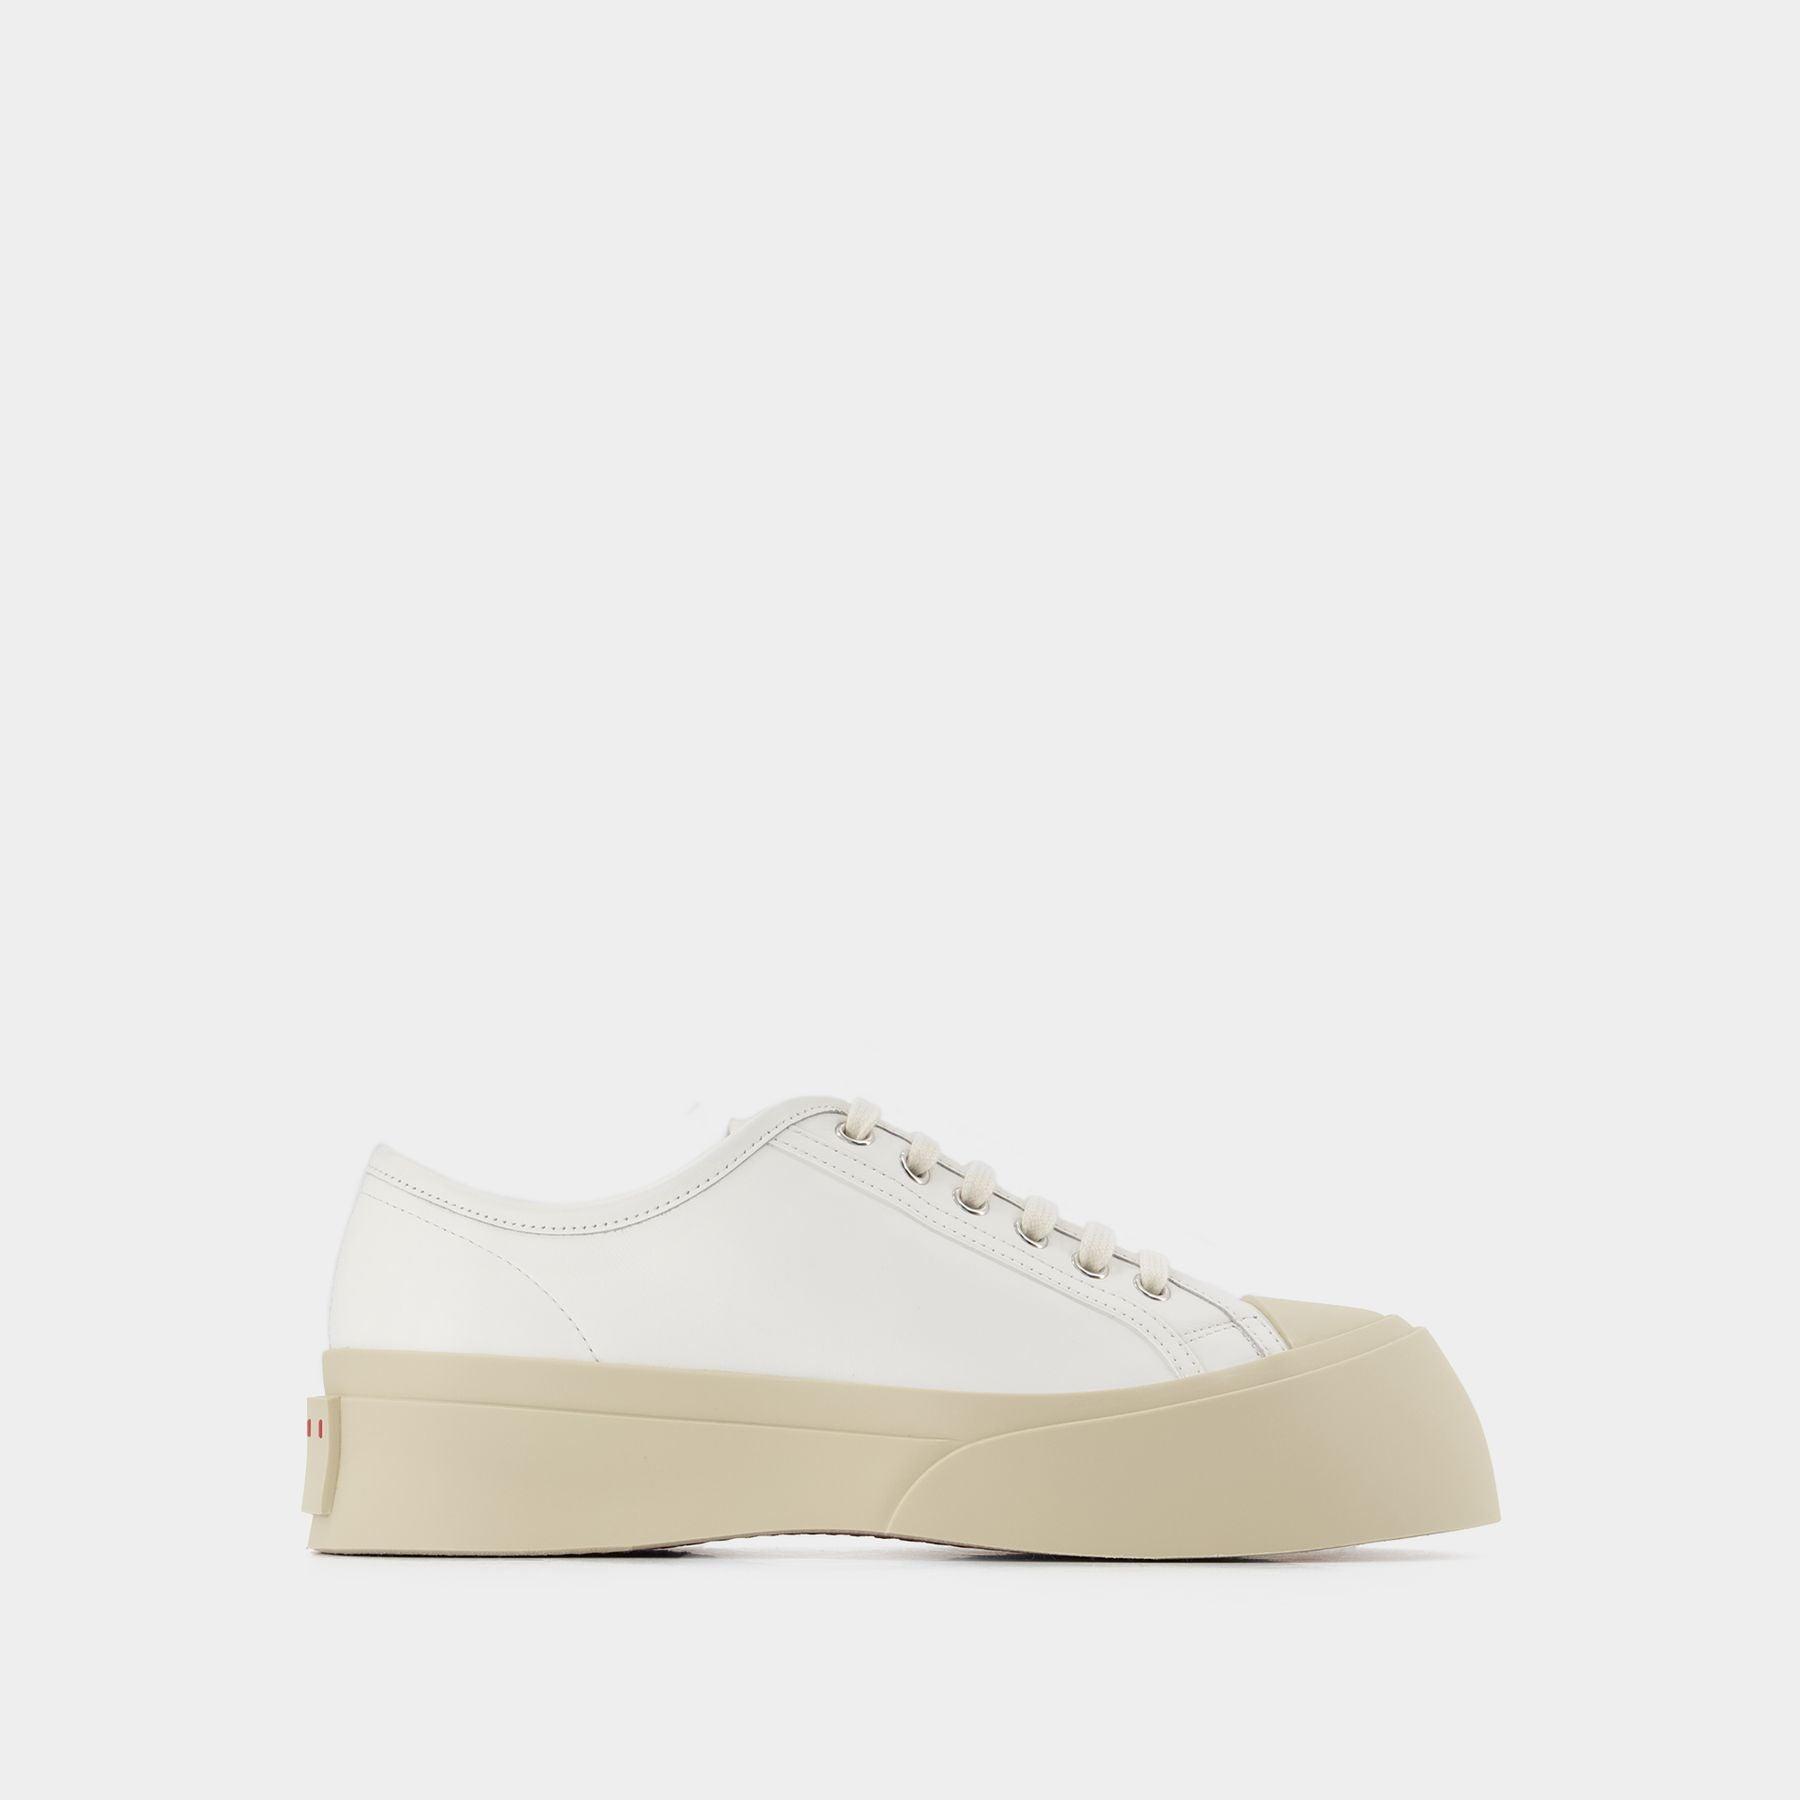 Marni Pablo Lace-up Sneakers - - White - Leather in Natural for Men | Lyst